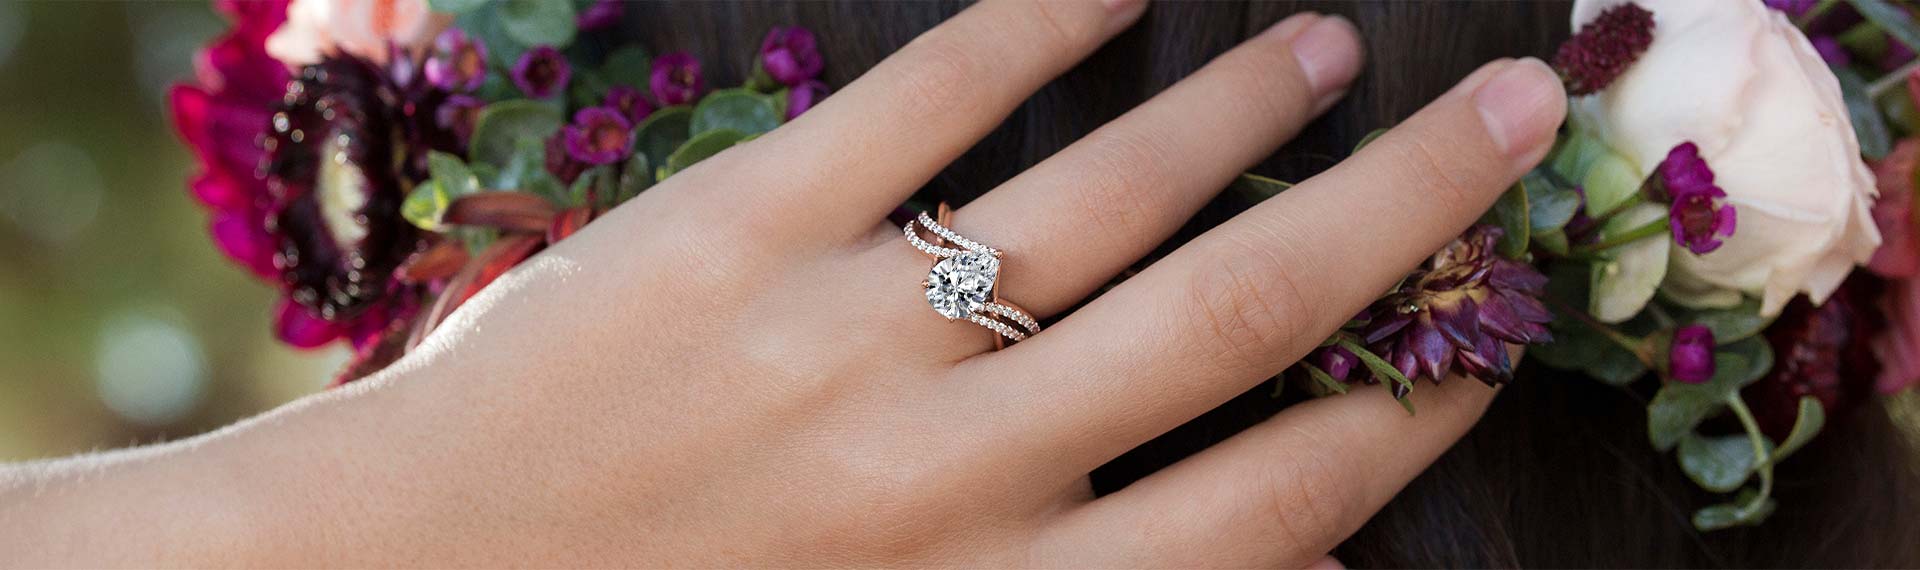 Unique Engagement Rings for Your Special Day